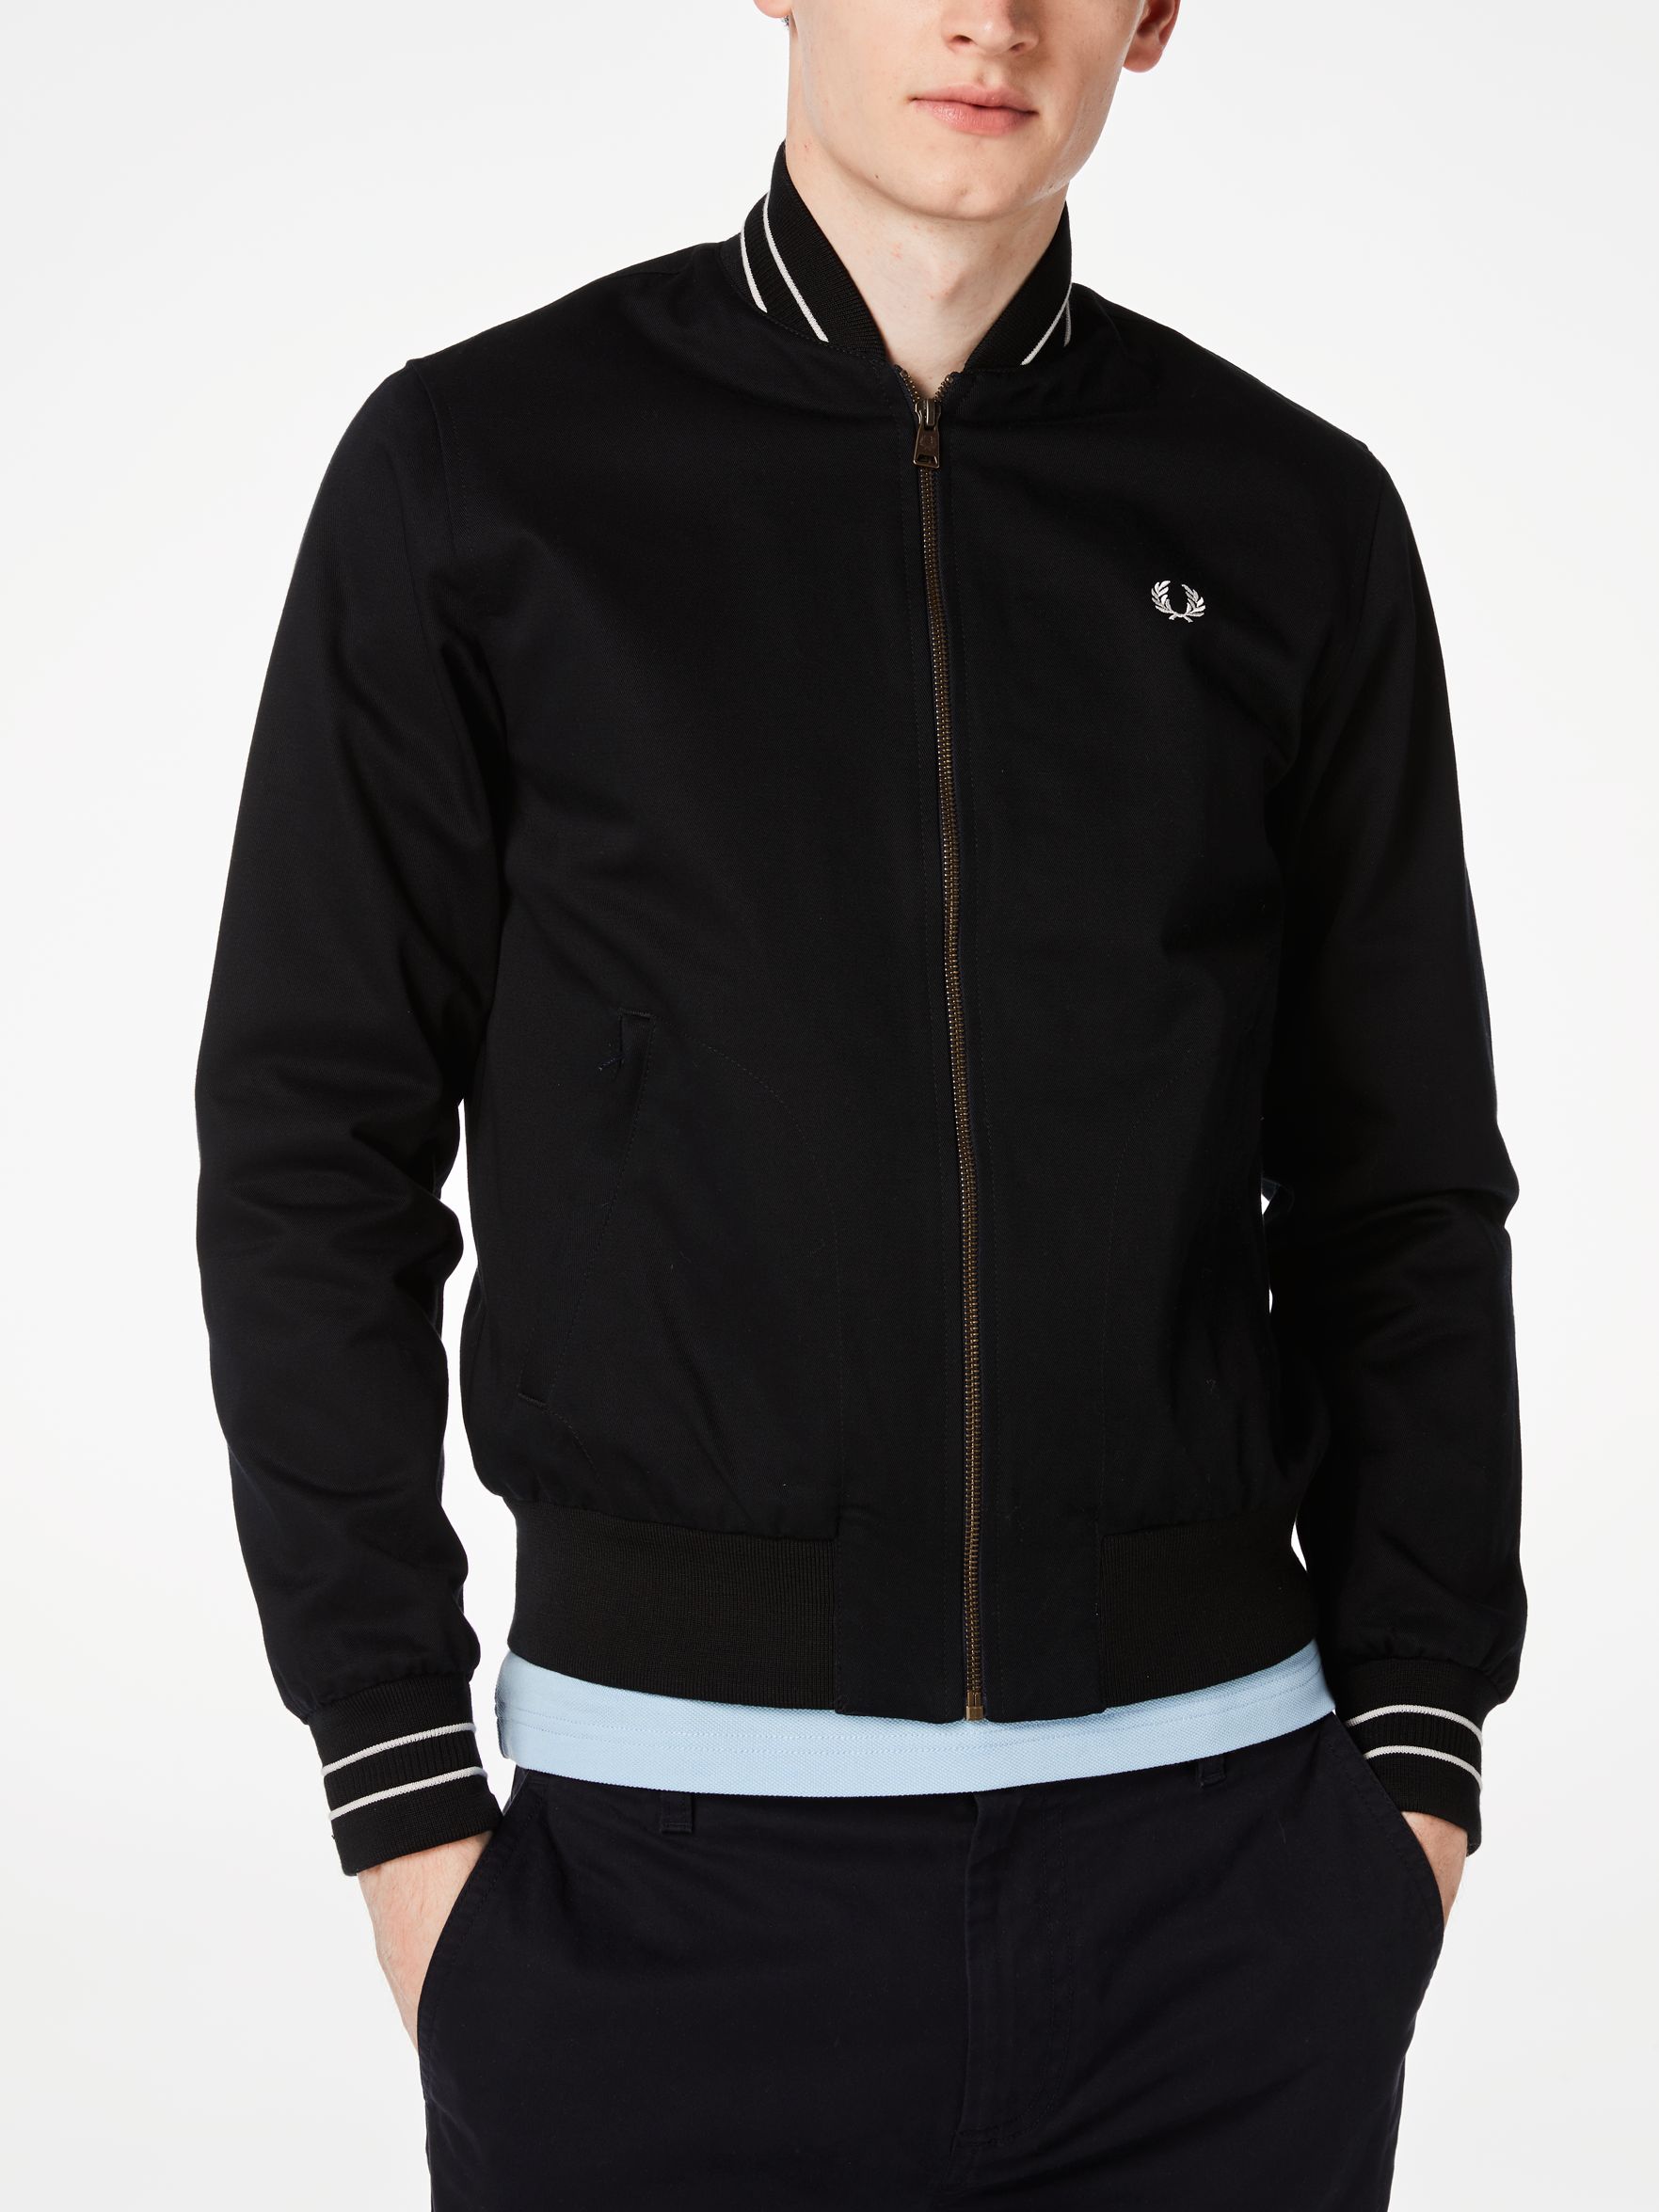 Fred Perry Bomber Jacket At John Lewis And Partners 